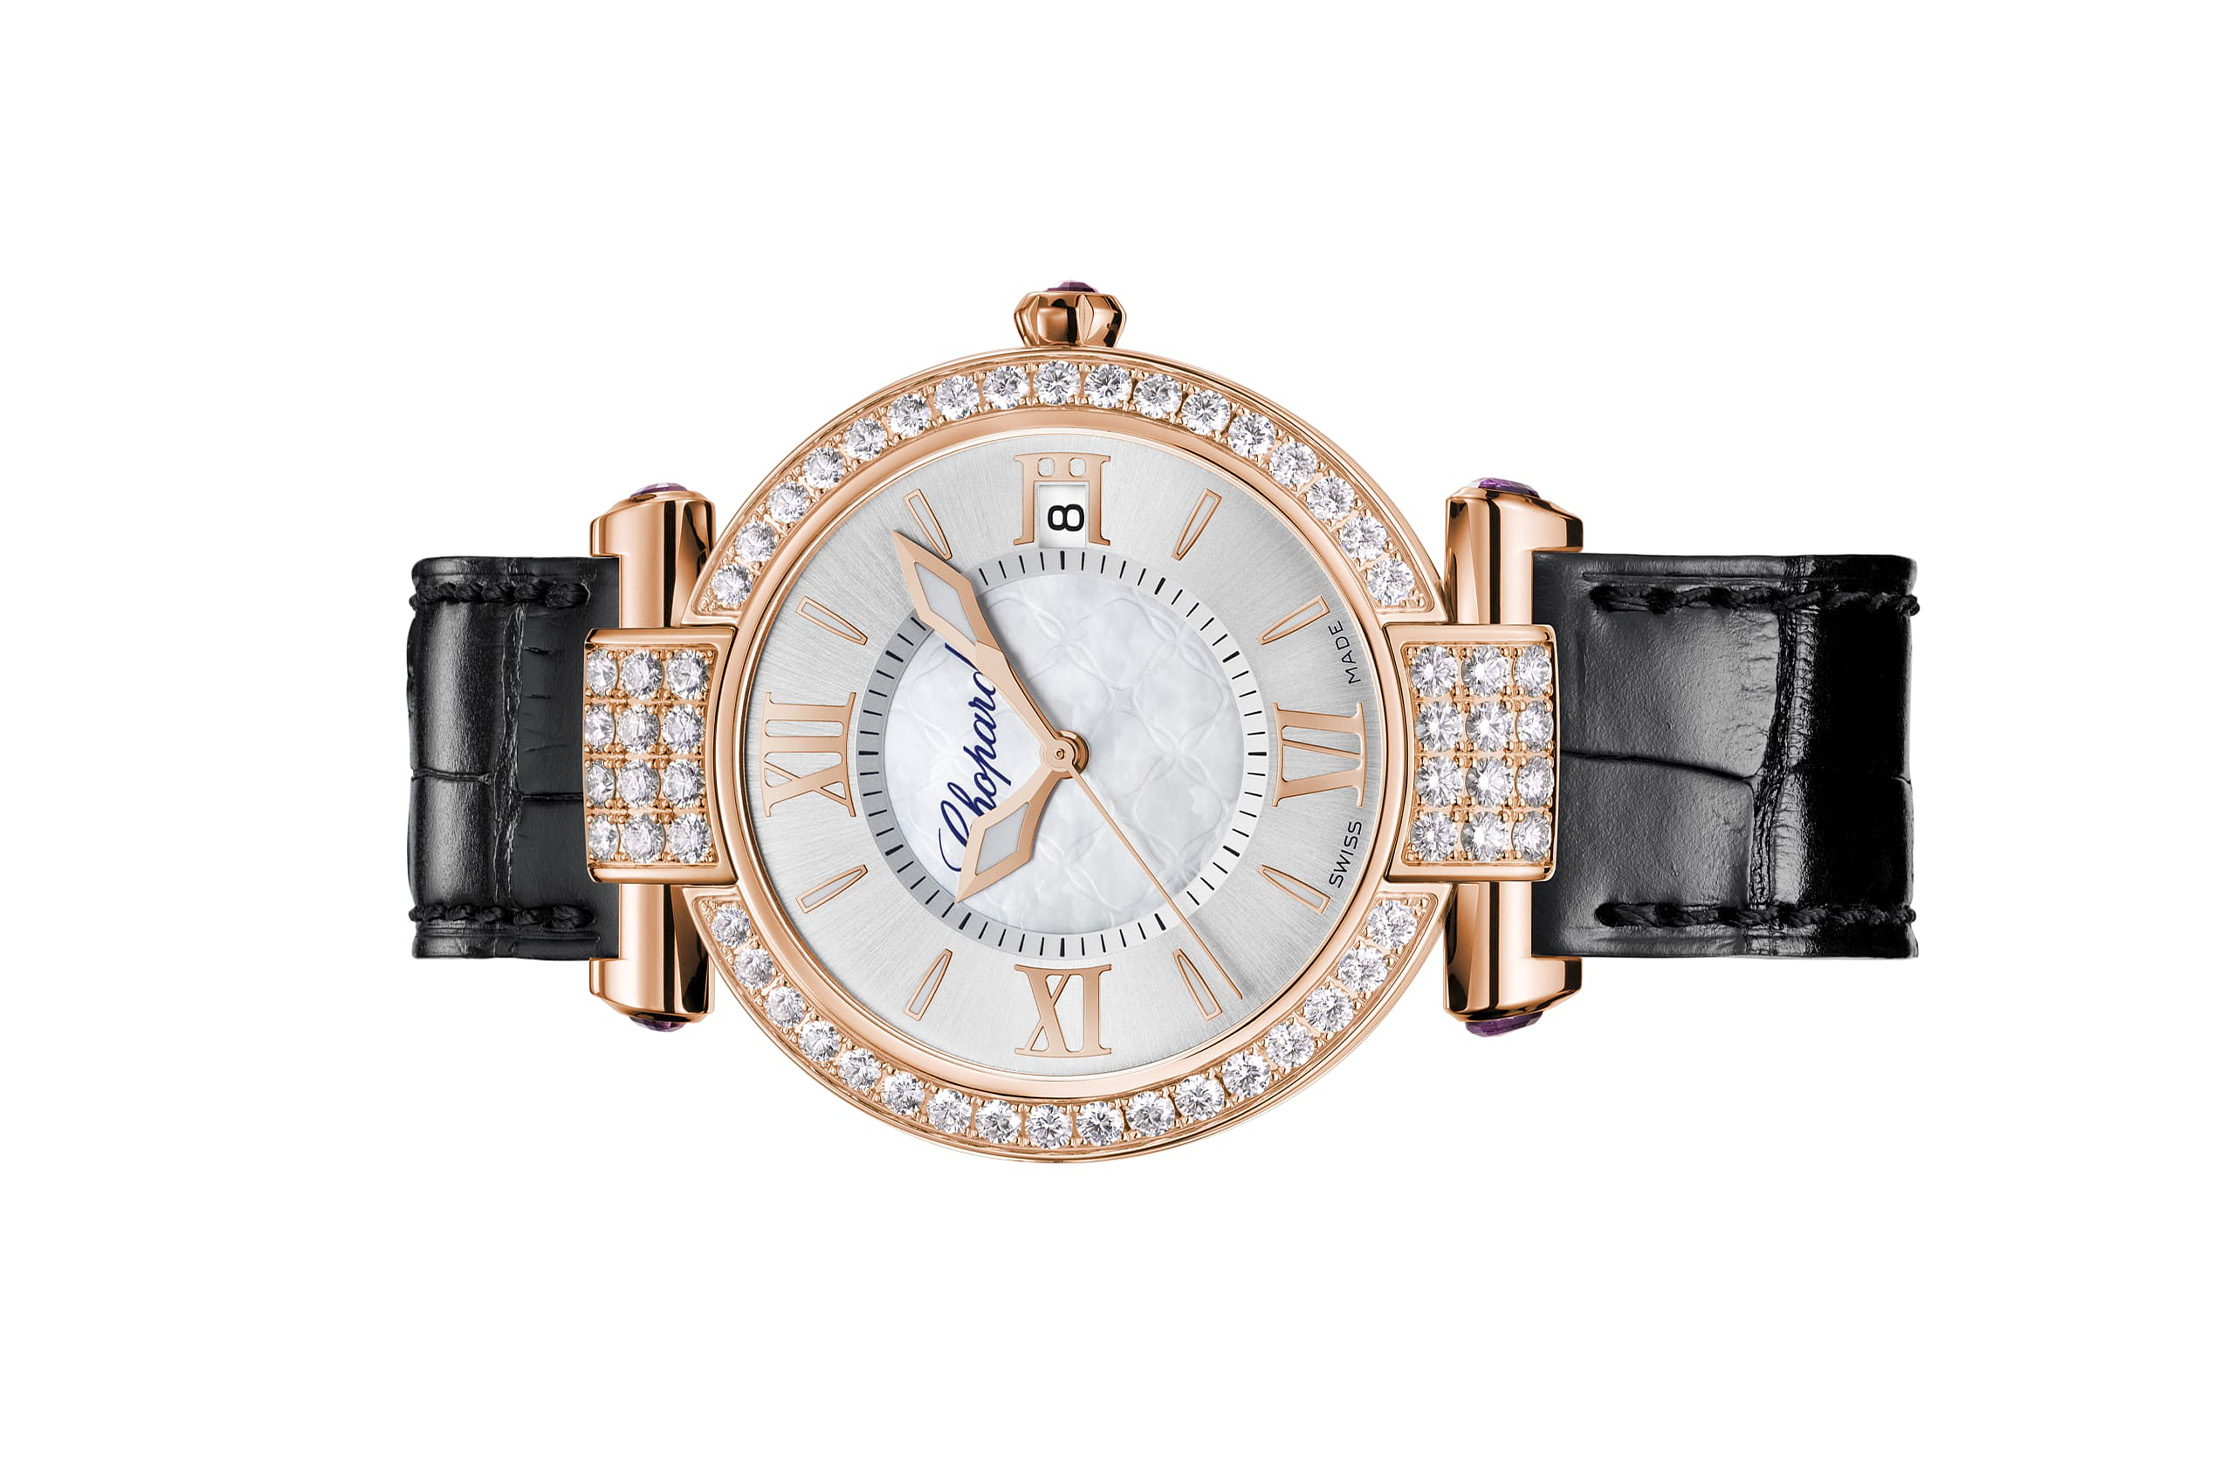 Đồng Hồ Chopard Imperiale 384822-5002